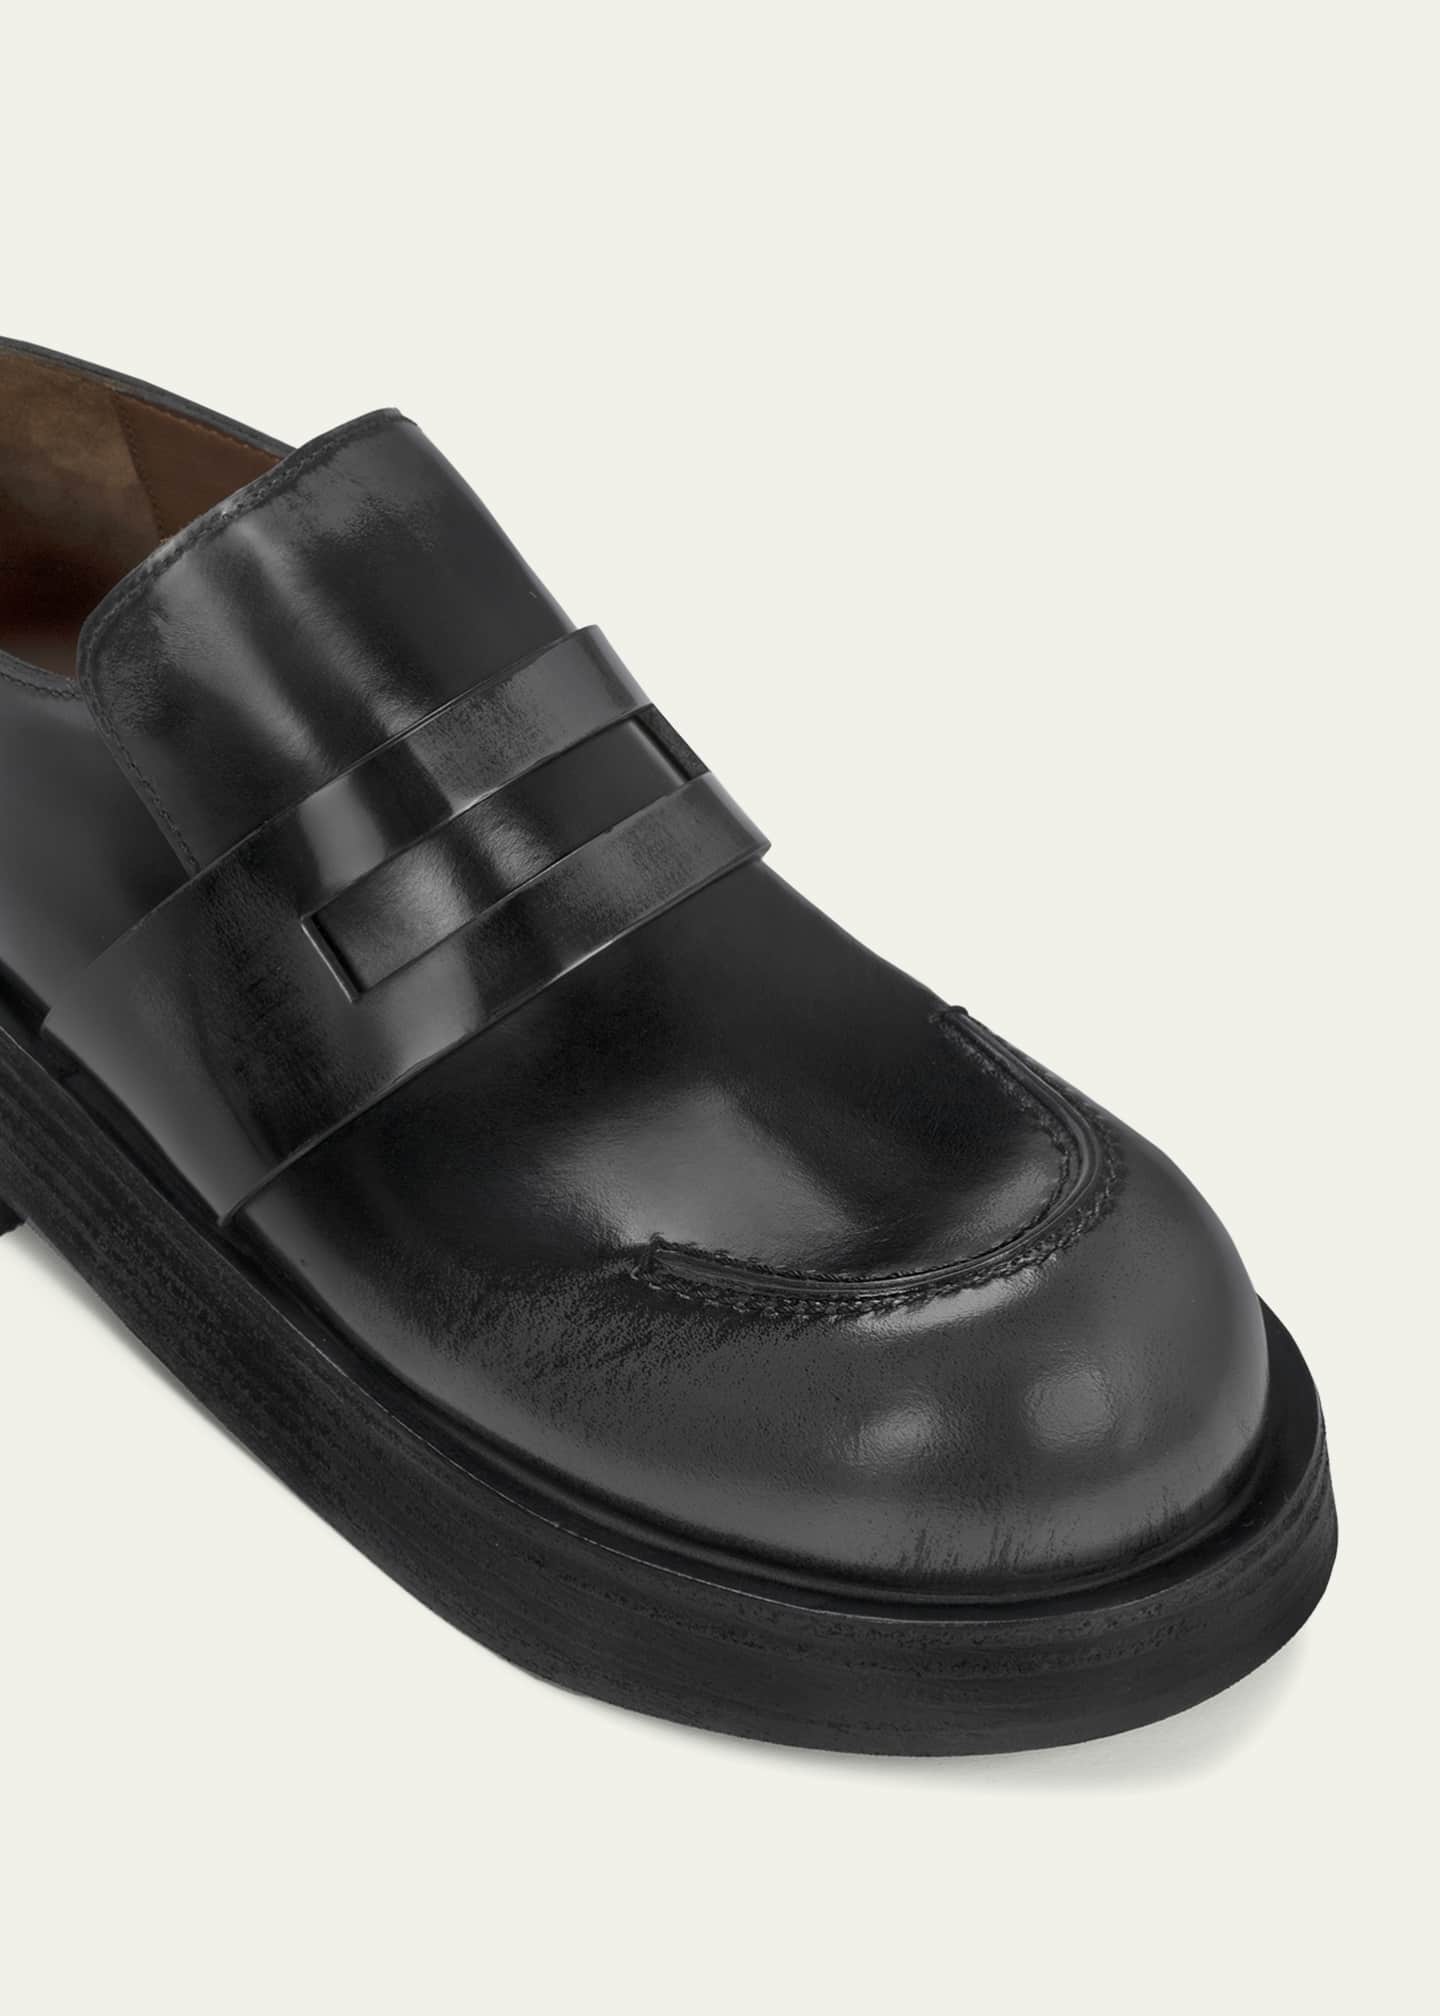 Marsell Musona Leather Penny Loafers - Bergdorf Goodman